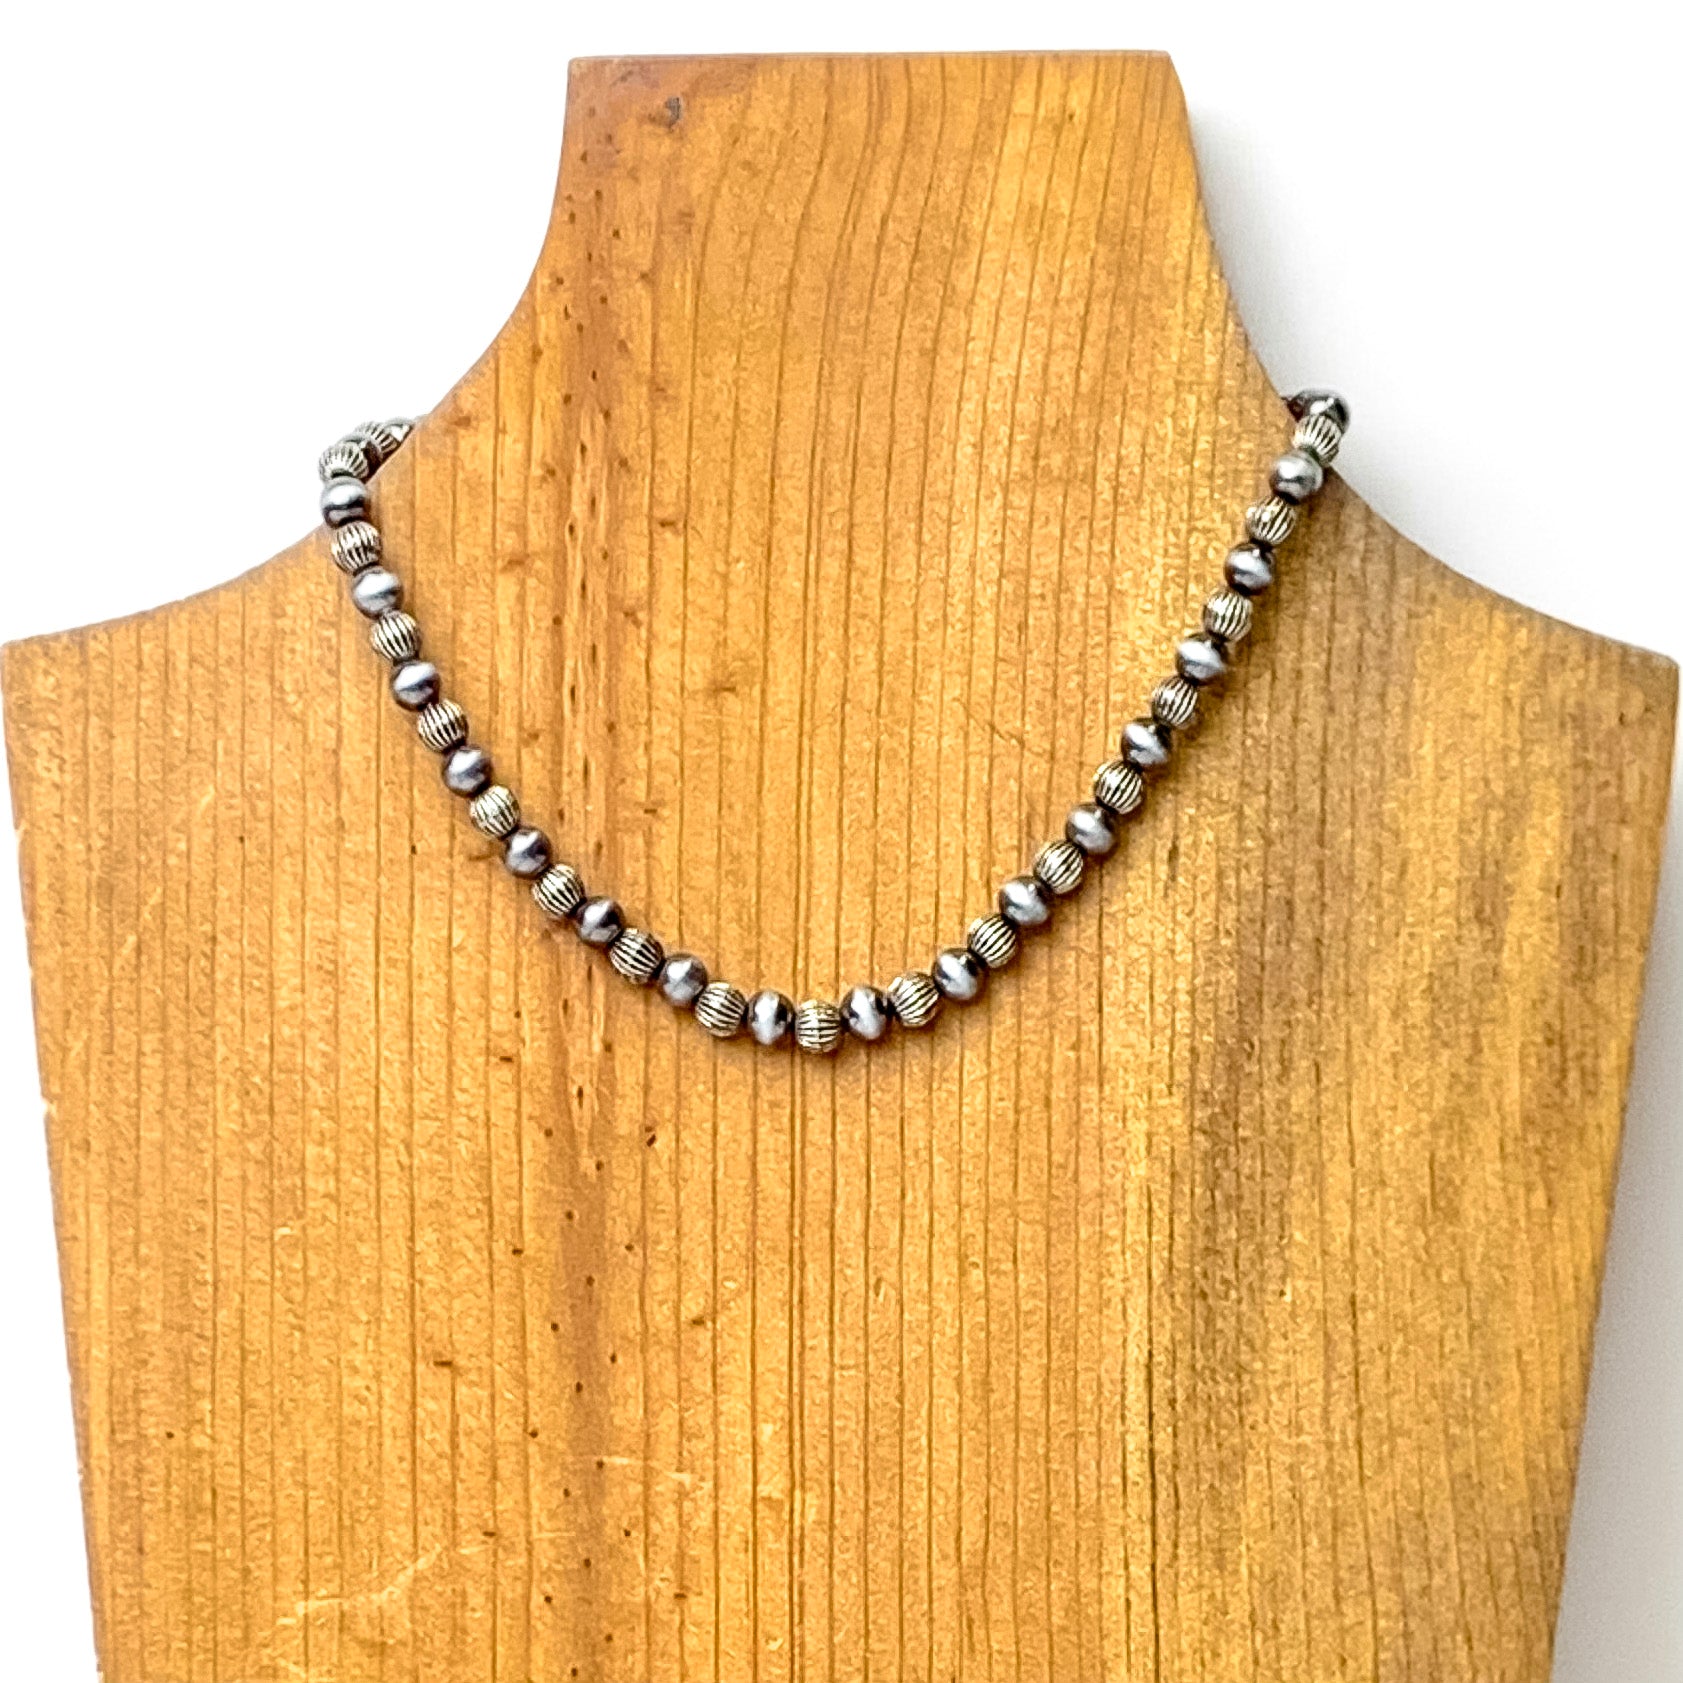 Faux Navajo Pearl Choker Necklace with Corrugated Spacers in Silver Tone - Giddy Up Glamour Boutique